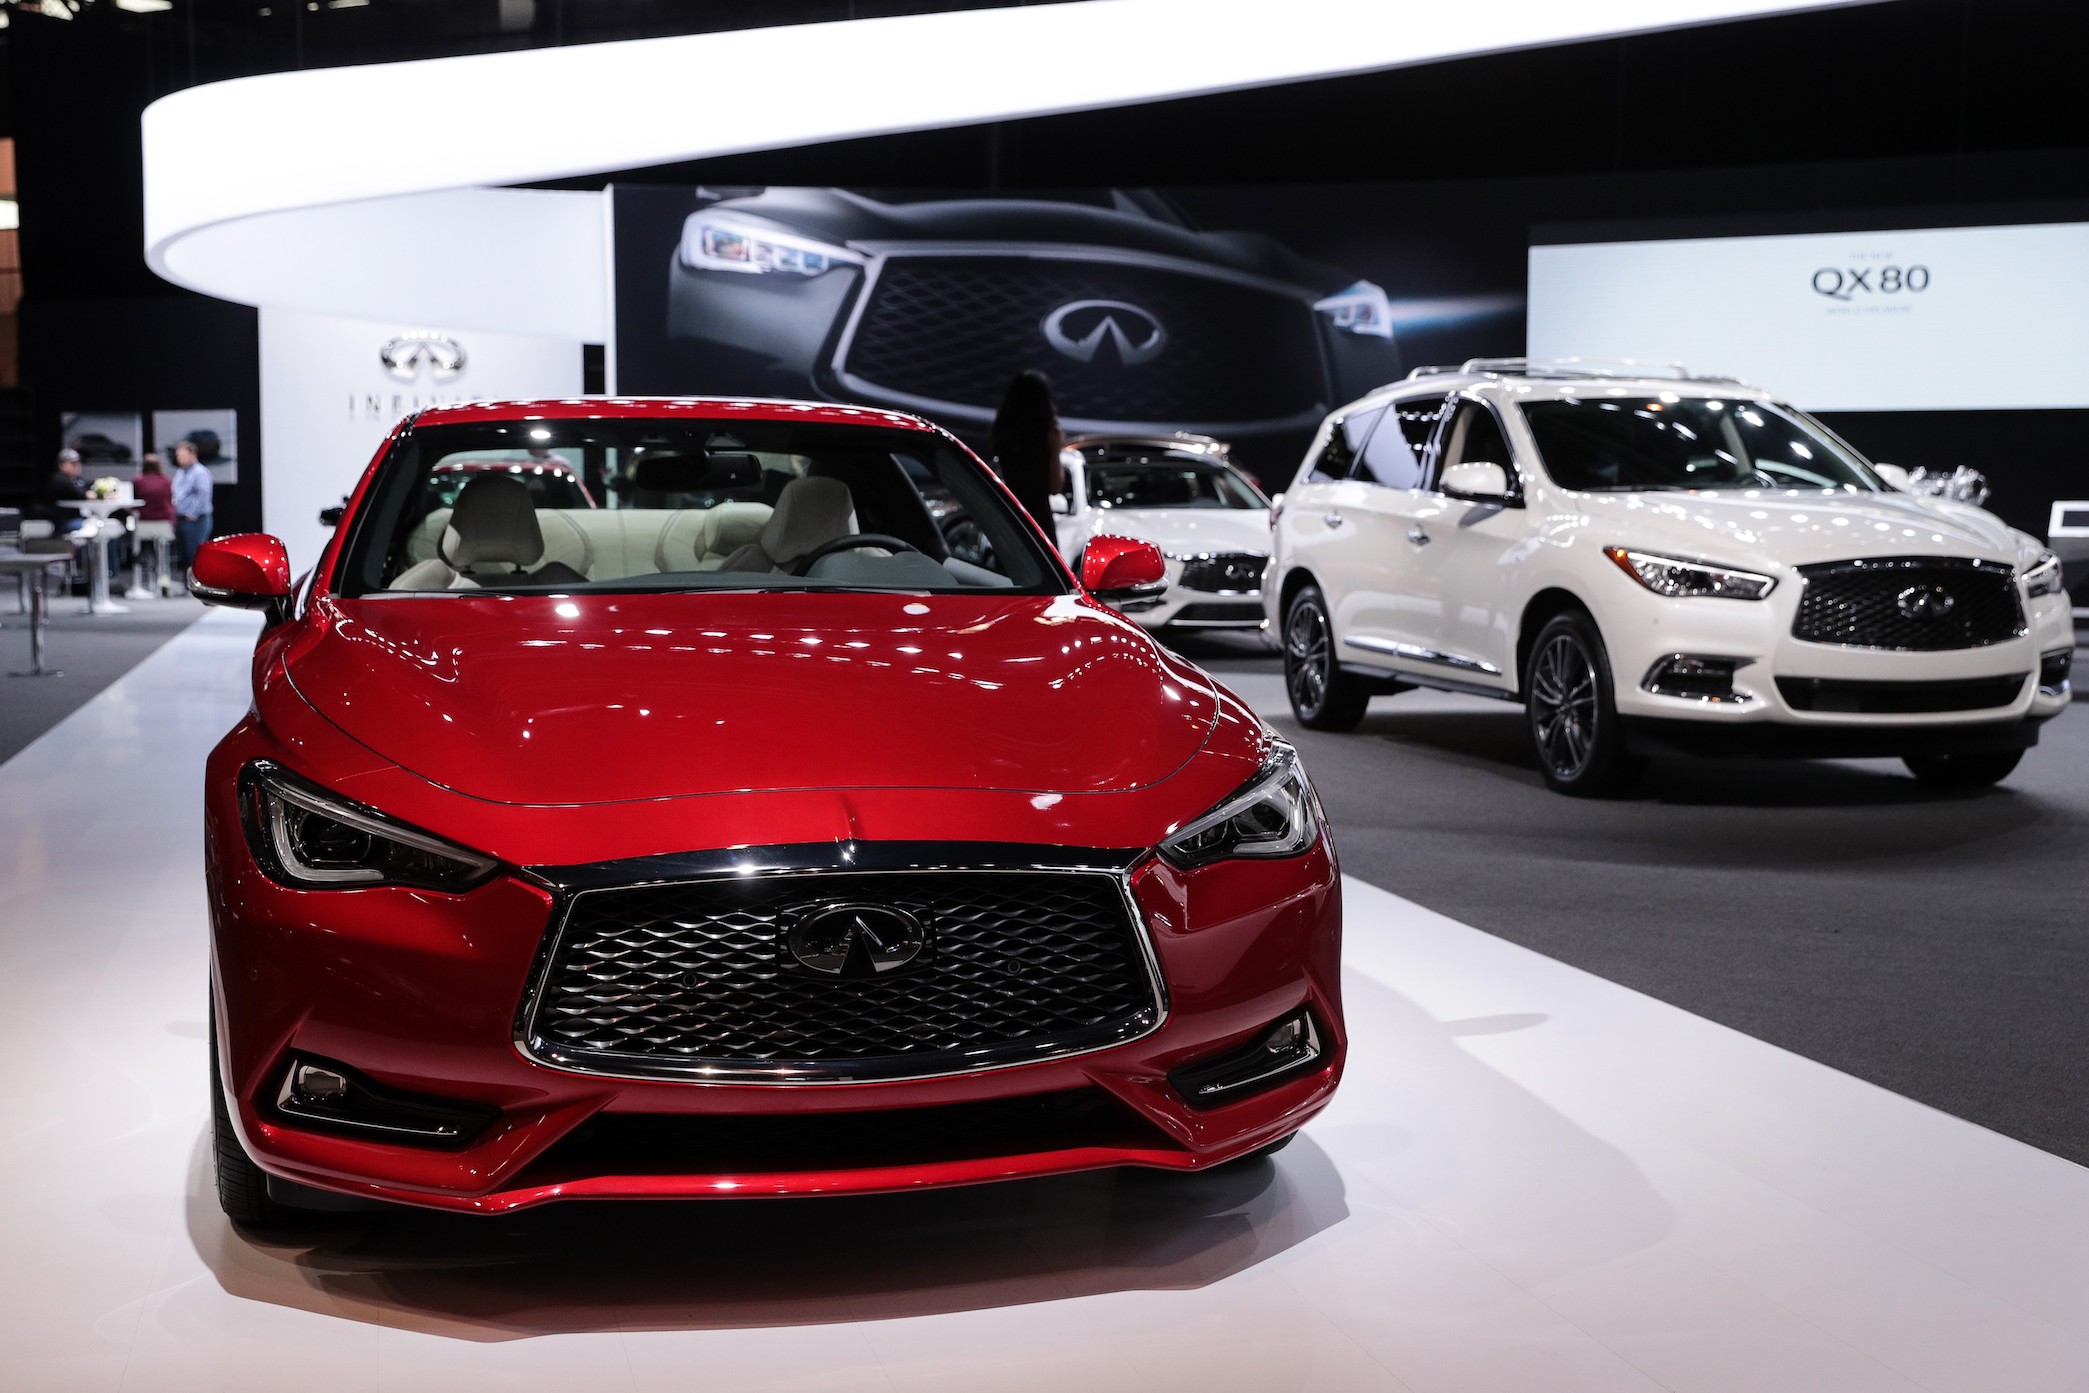 Infiniti Q60 S is on display during the Chicago Auto Show at McCormick Place